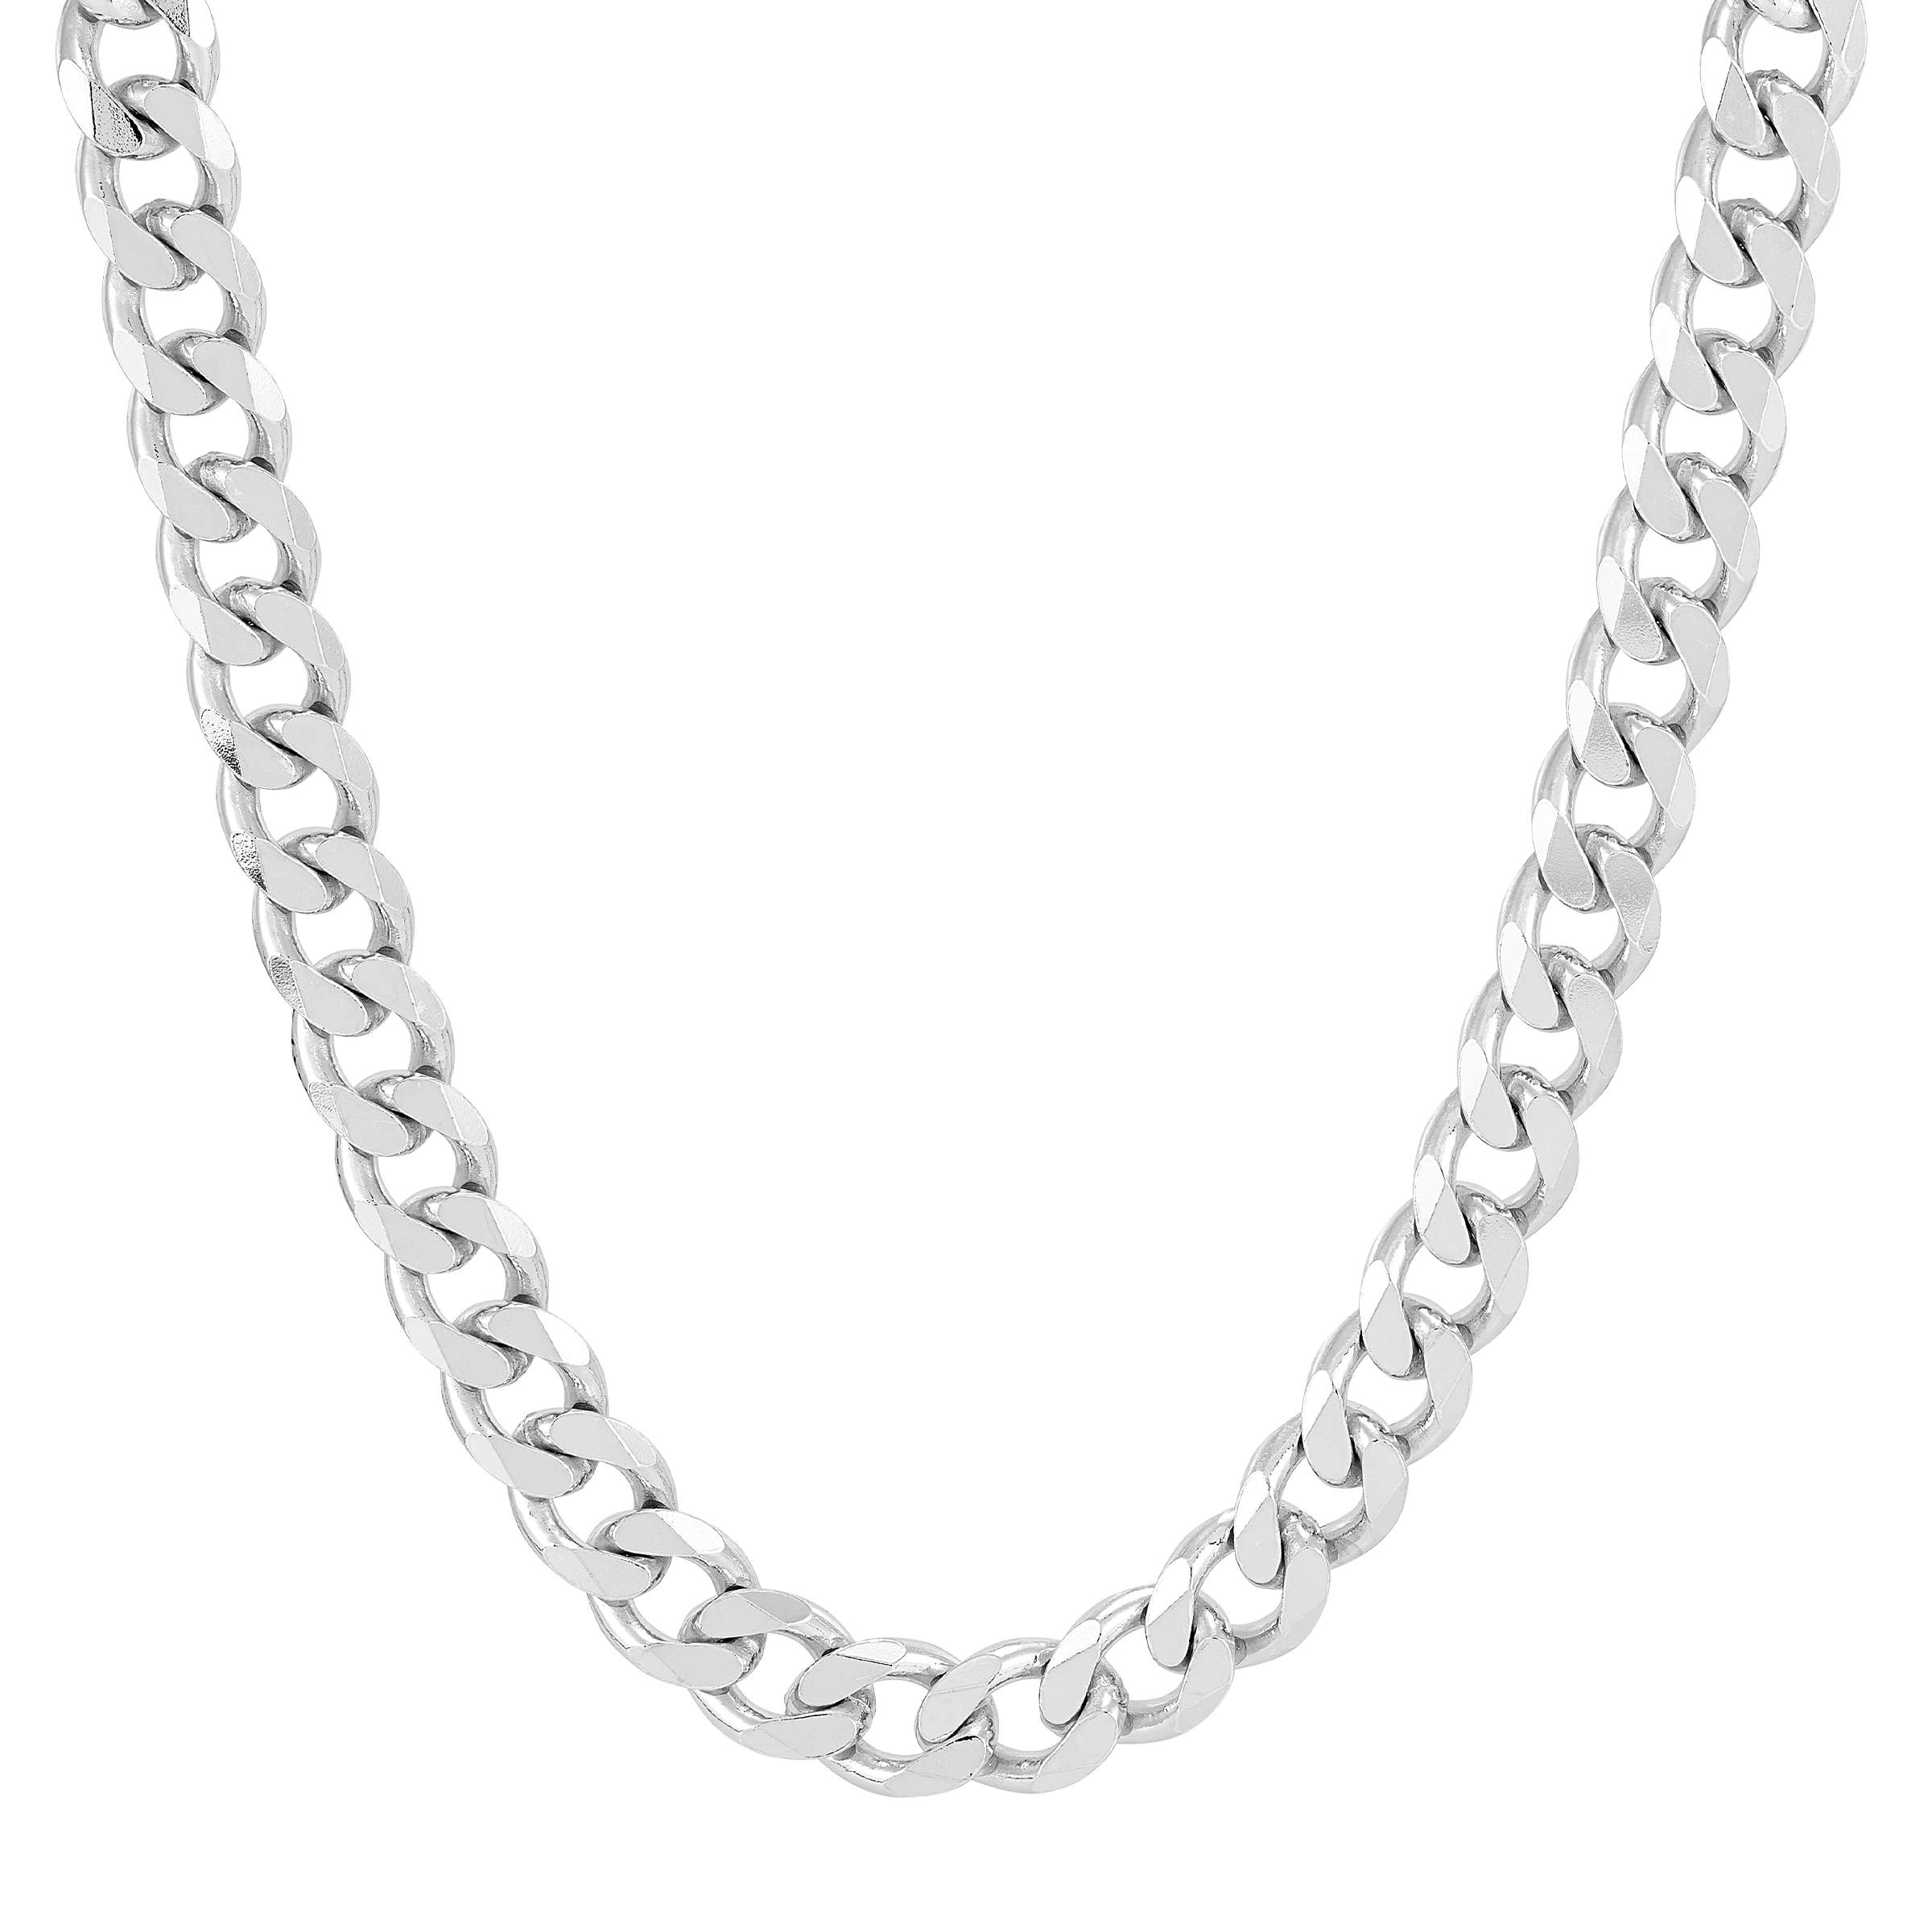 Pre-owned Welry Men's 7.8mm Sterling Silver Flat Curb Chain Necklace, 22" In White